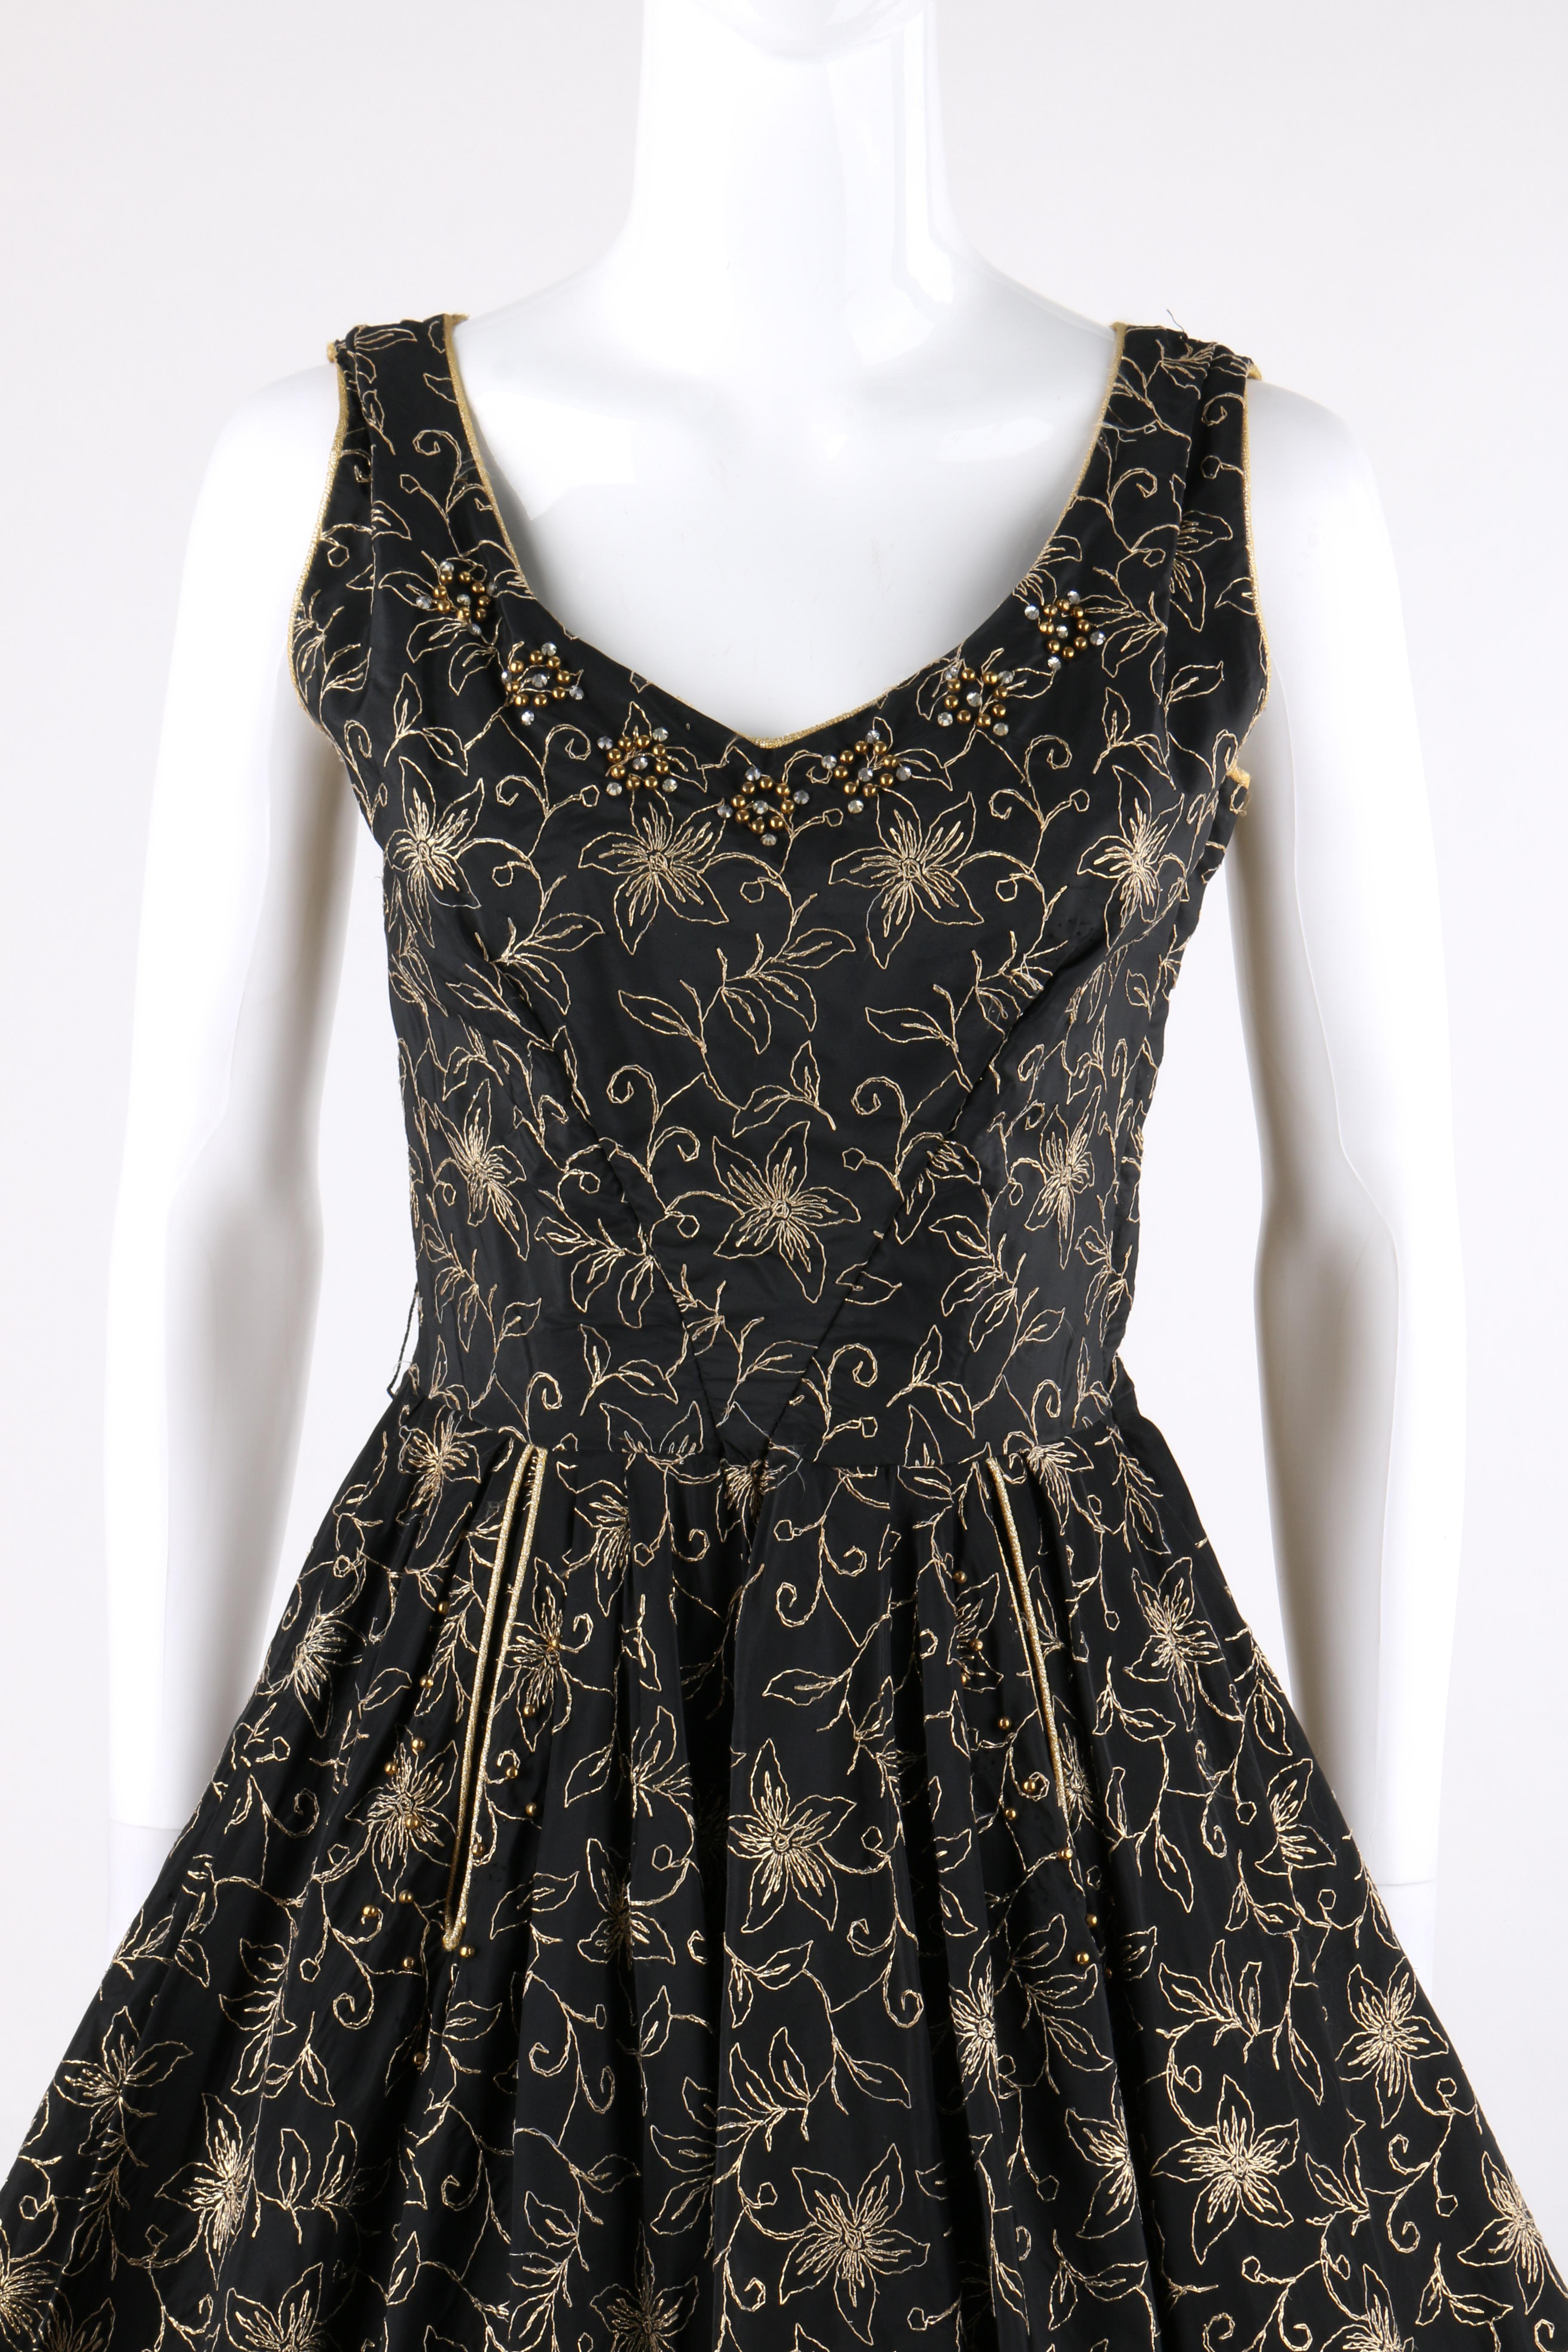 COUTURE c.1950’s Black Gold Floral Rhinestone Embellished Beaded Fit n Flare Party Dress 

ONE OF A KIND!

Circa: 1950’s
Style: Fit n Flare dress
Color(s): Shades of black and gold
Lined: Partial
Unmarked Fabric Content (feel of): Taffeta; metal